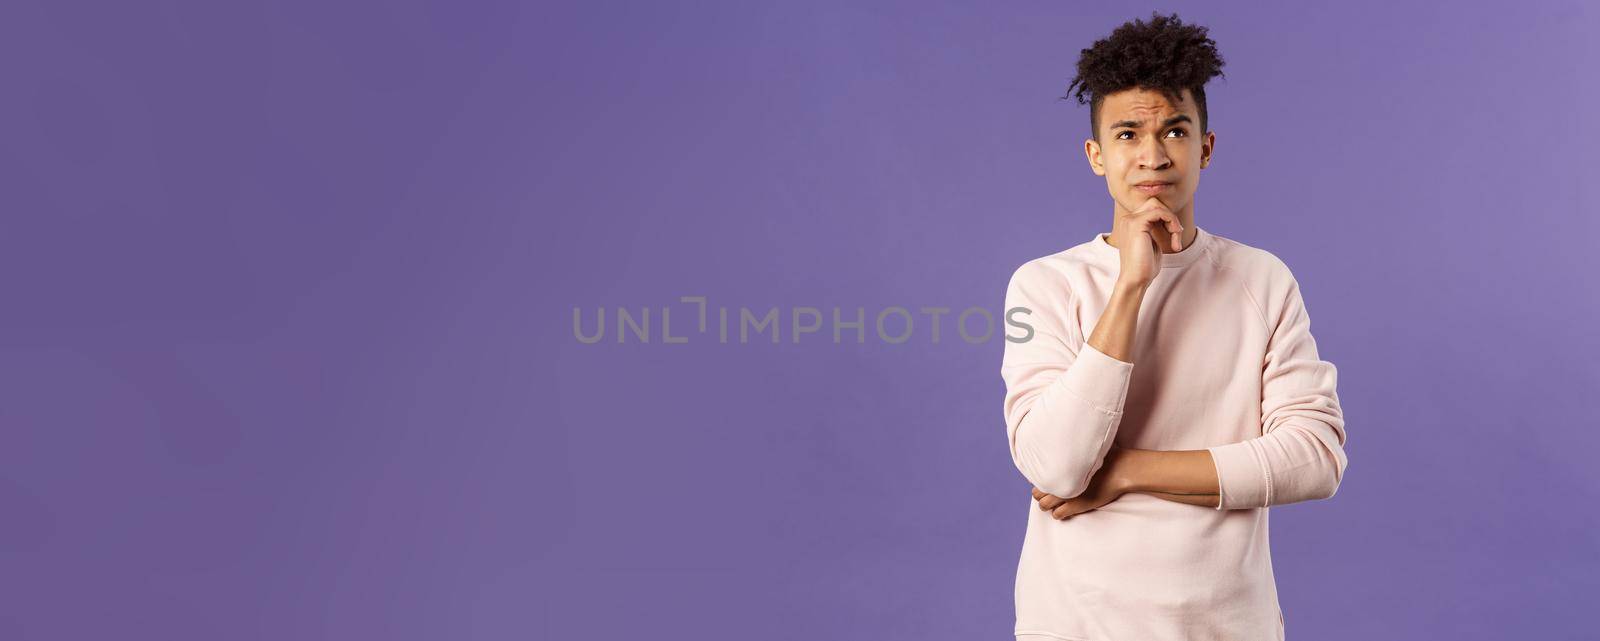 Portrait of complicated, young thoughtful man with dreads, look troubled up, thinking what to do, standing indecisive, grimacing not knowing answer, facing hard choices, purple background by Benzoix